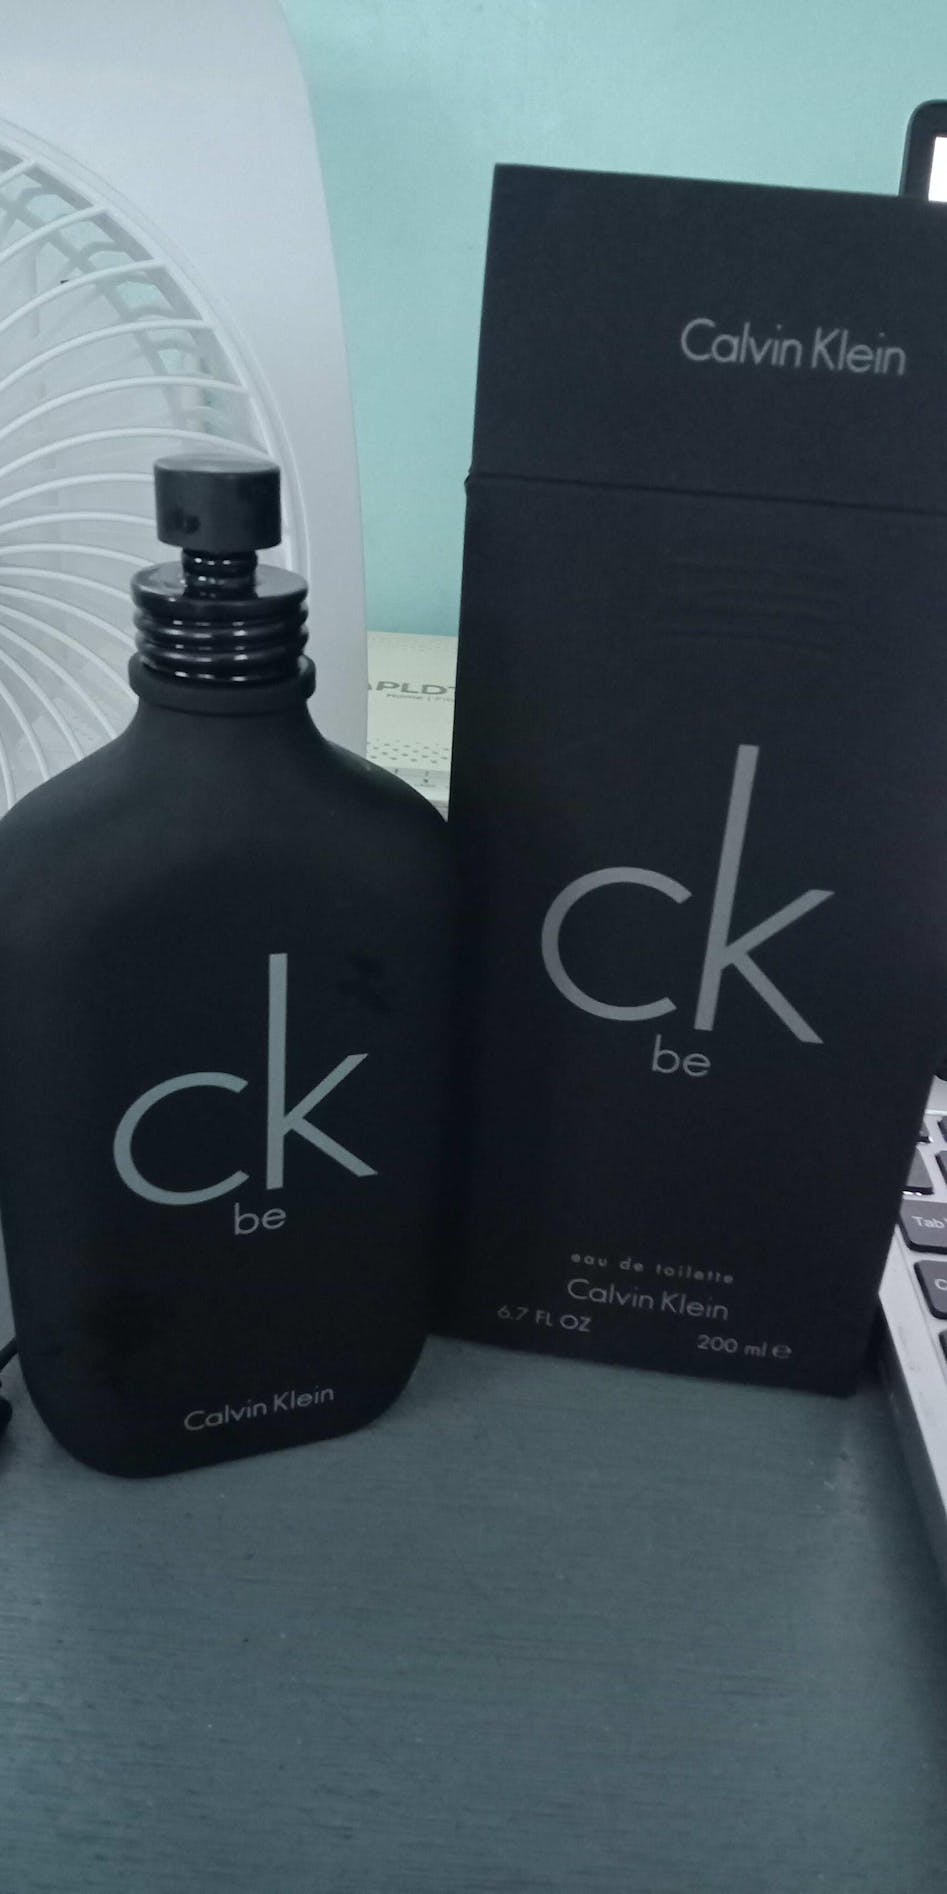 last rietje opgraven Calvin Klein CK BE 200ml | Branded and Authentic Perfumes for Men and Women